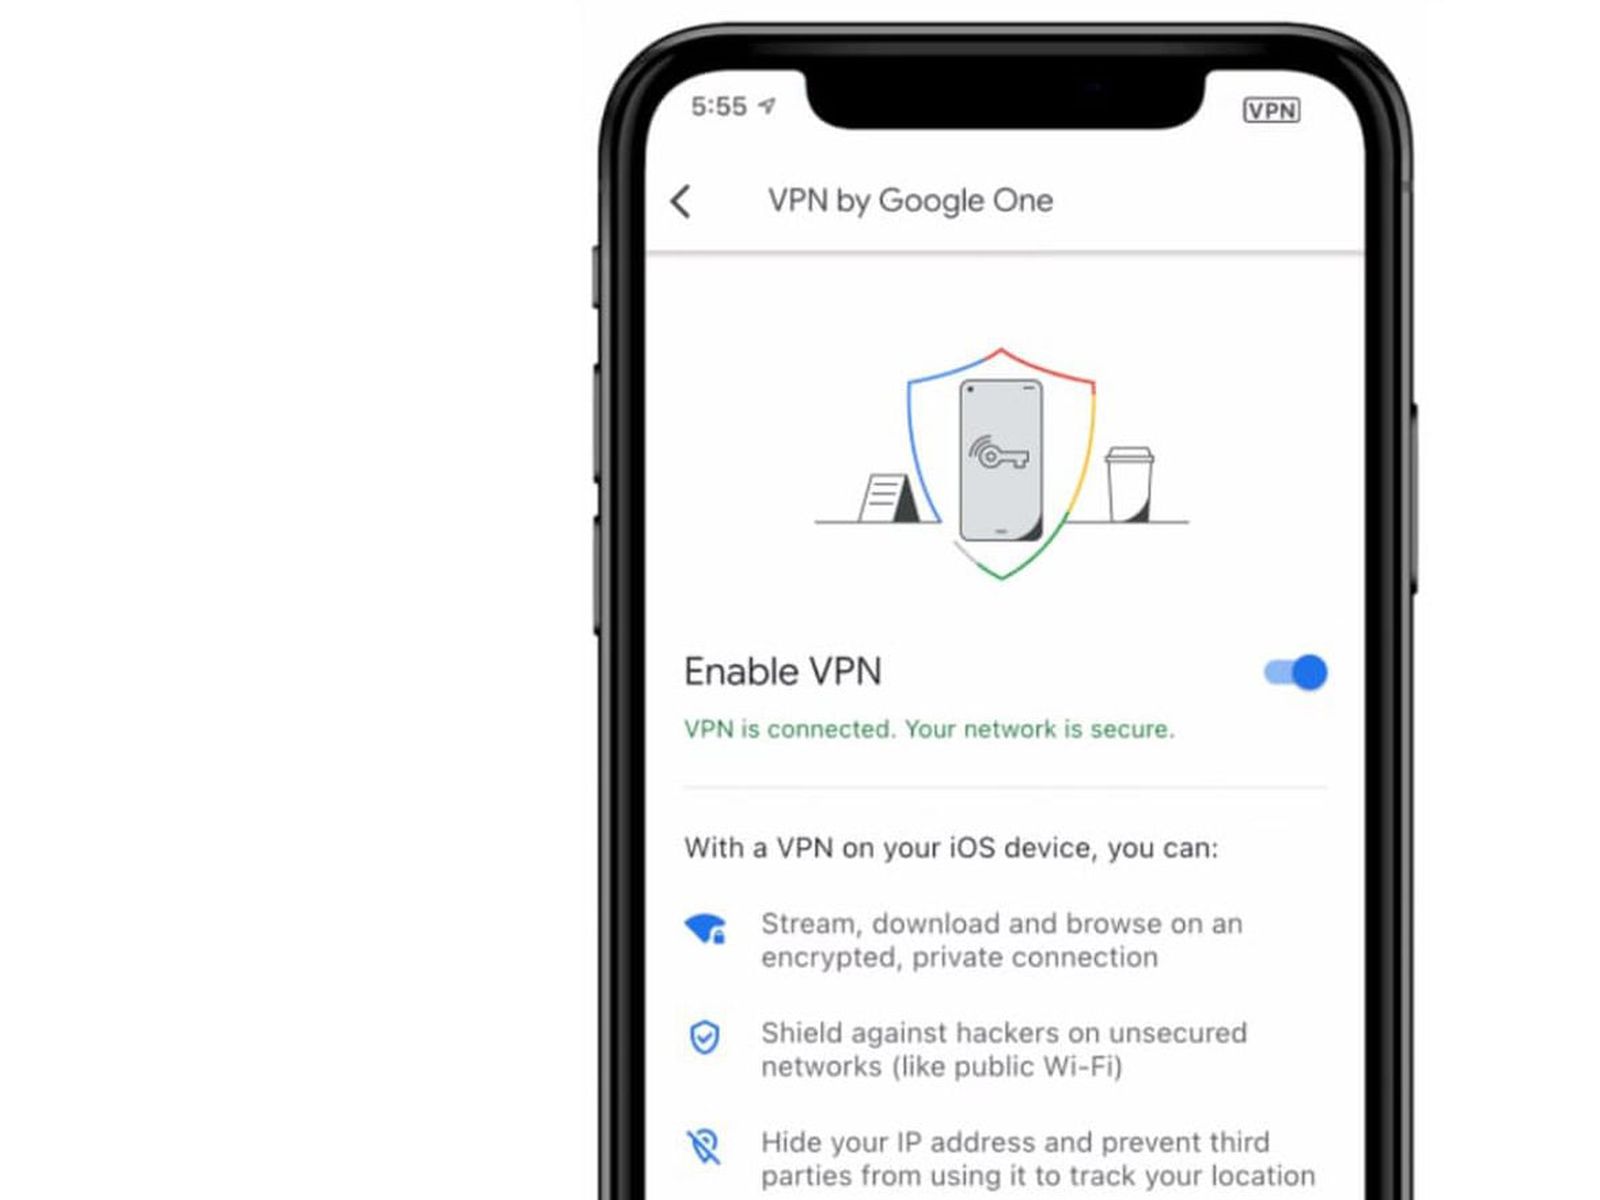 Google One VPN: What you need to know about this privacy tool - CNET